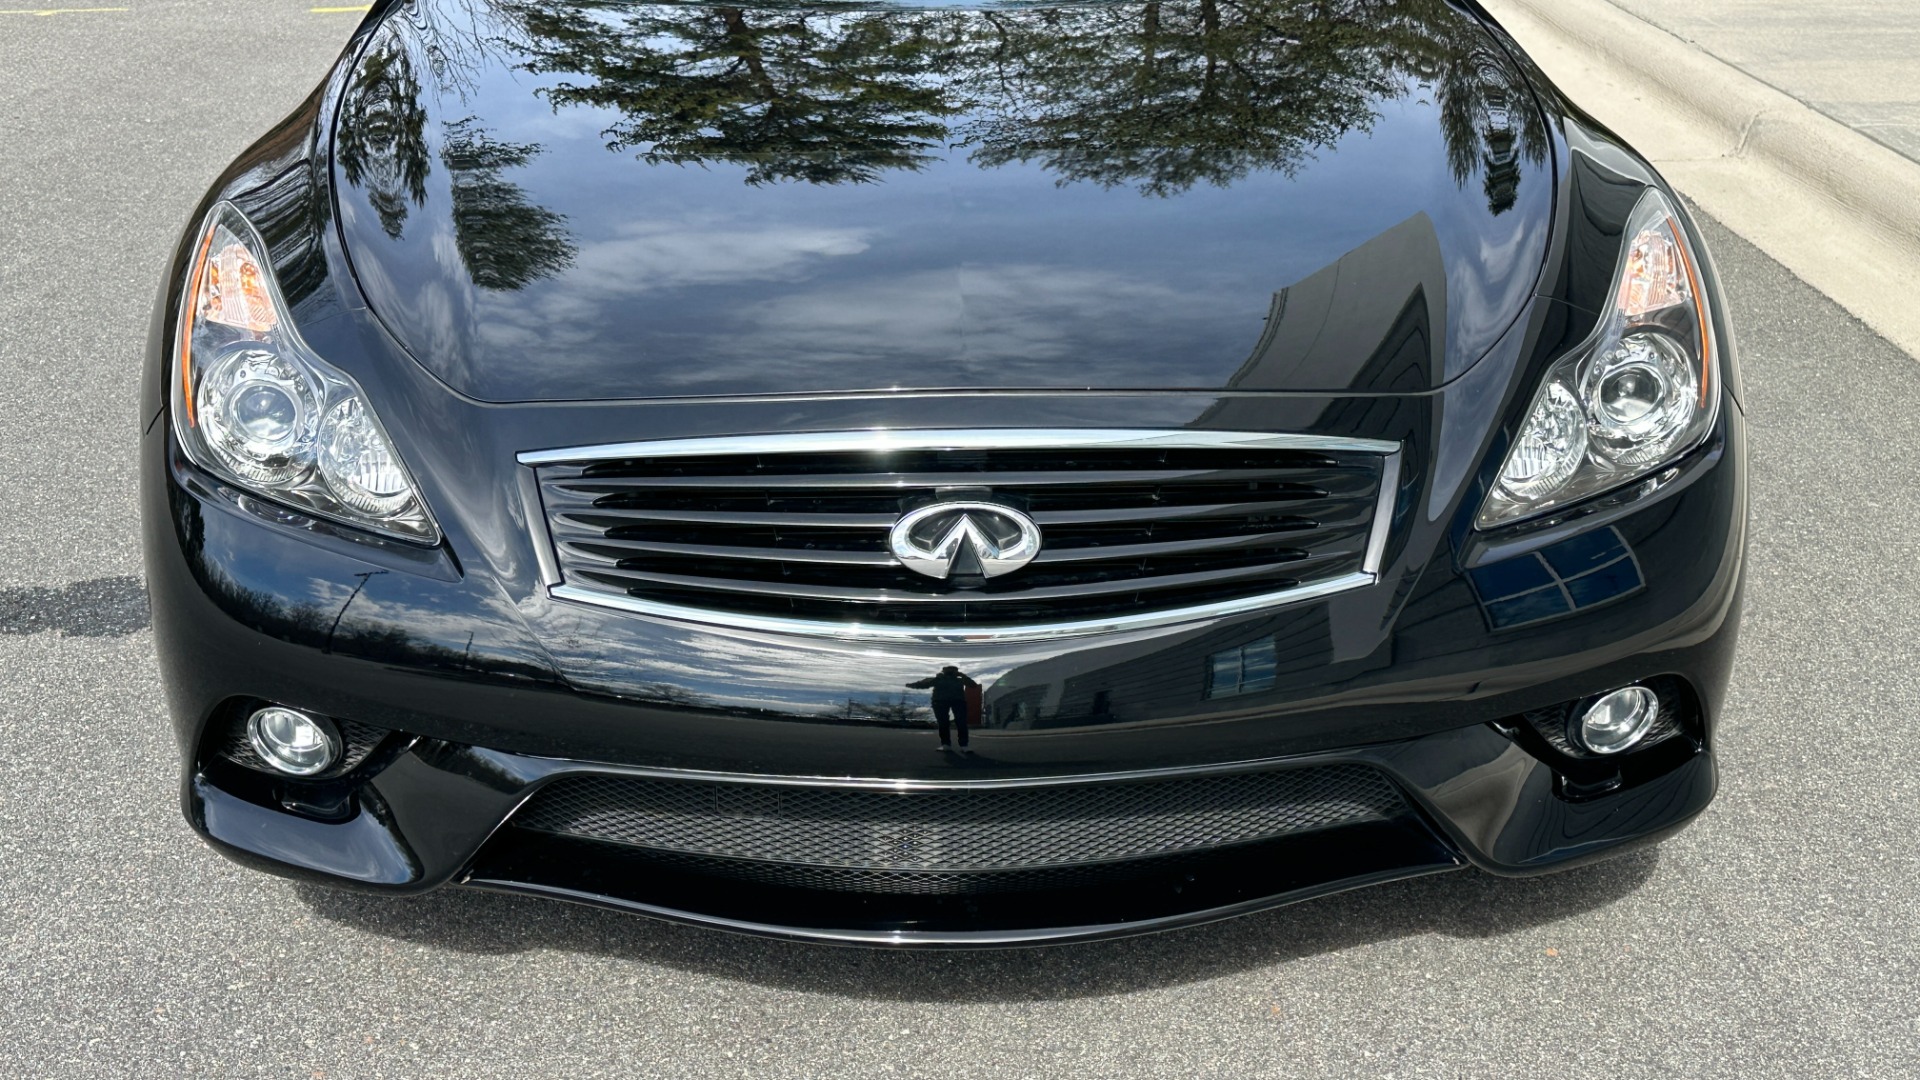 Used 2015 INFINITI Q60 Coupe JOURNEY / SPORT / PREMIUM / NAVIGATION / MIDNIGHT GRILLE for sale Sold at Formula Imports in Charlotte NC 28227 9